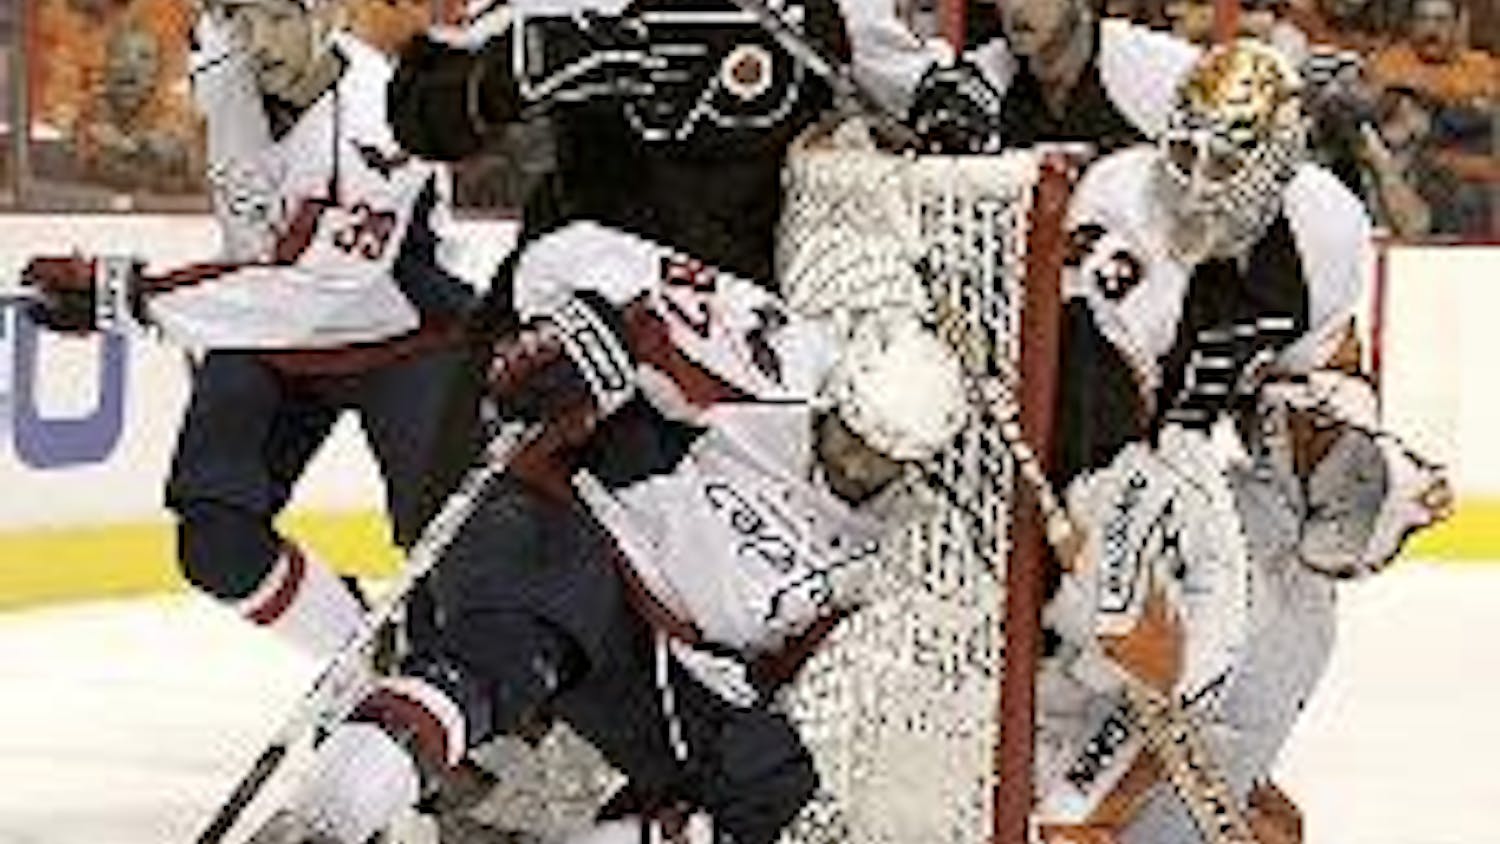 UPENDED -The Southeast Division champions, the Washington Capitals, will have to stay on their feet to stick with the Philadelphia Flyers in the first round. 